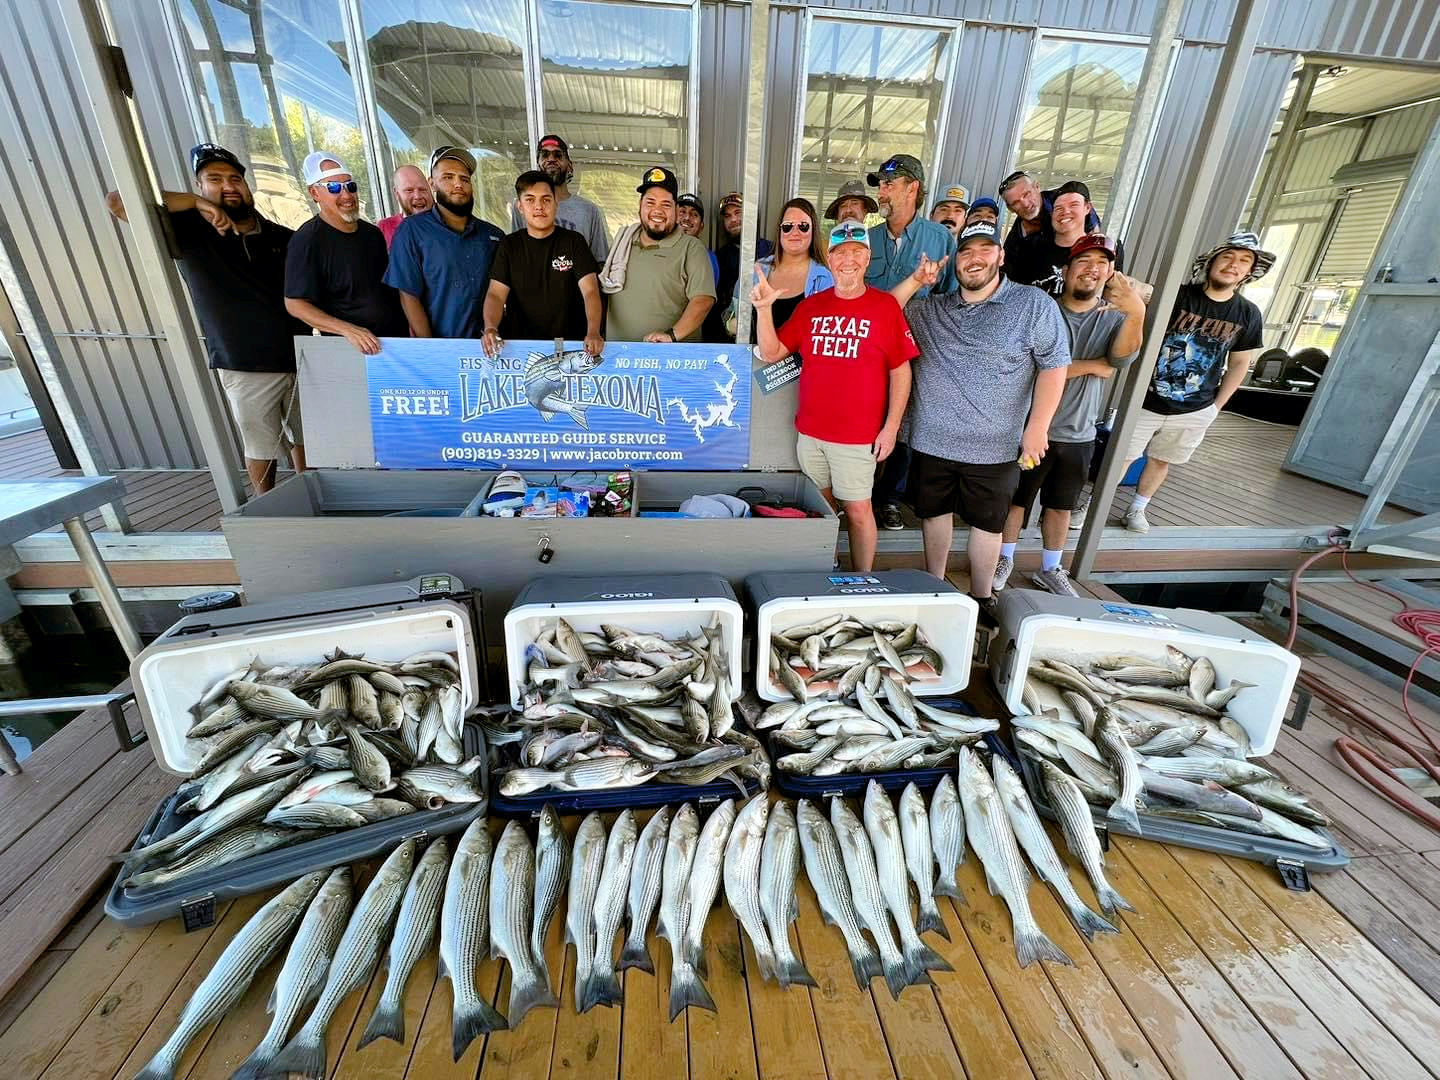 Corporate Castaway: Lake Texoma Executive Angling Package from Jacob Orr's Guaranteed Guide Service